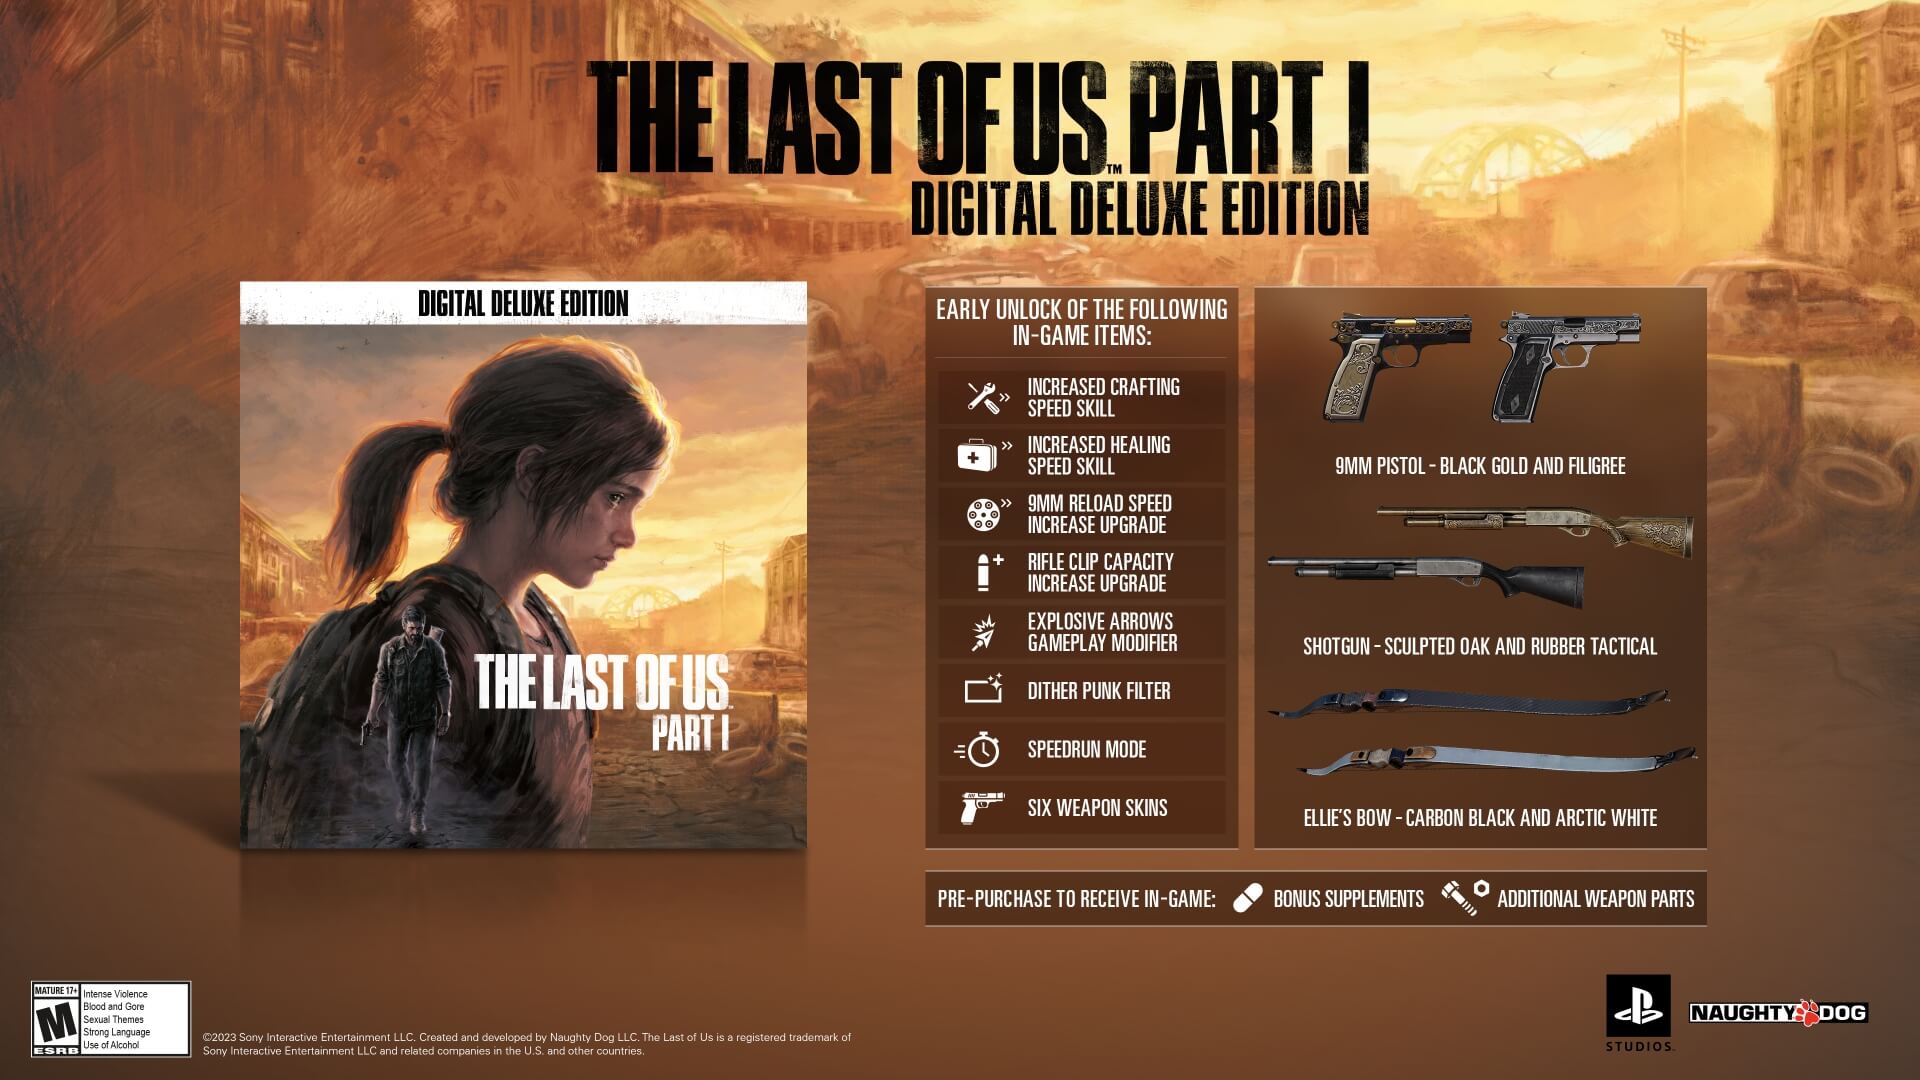 Giới thiệu chung về game The Last of Us Part I – Digital Deluxe Edition